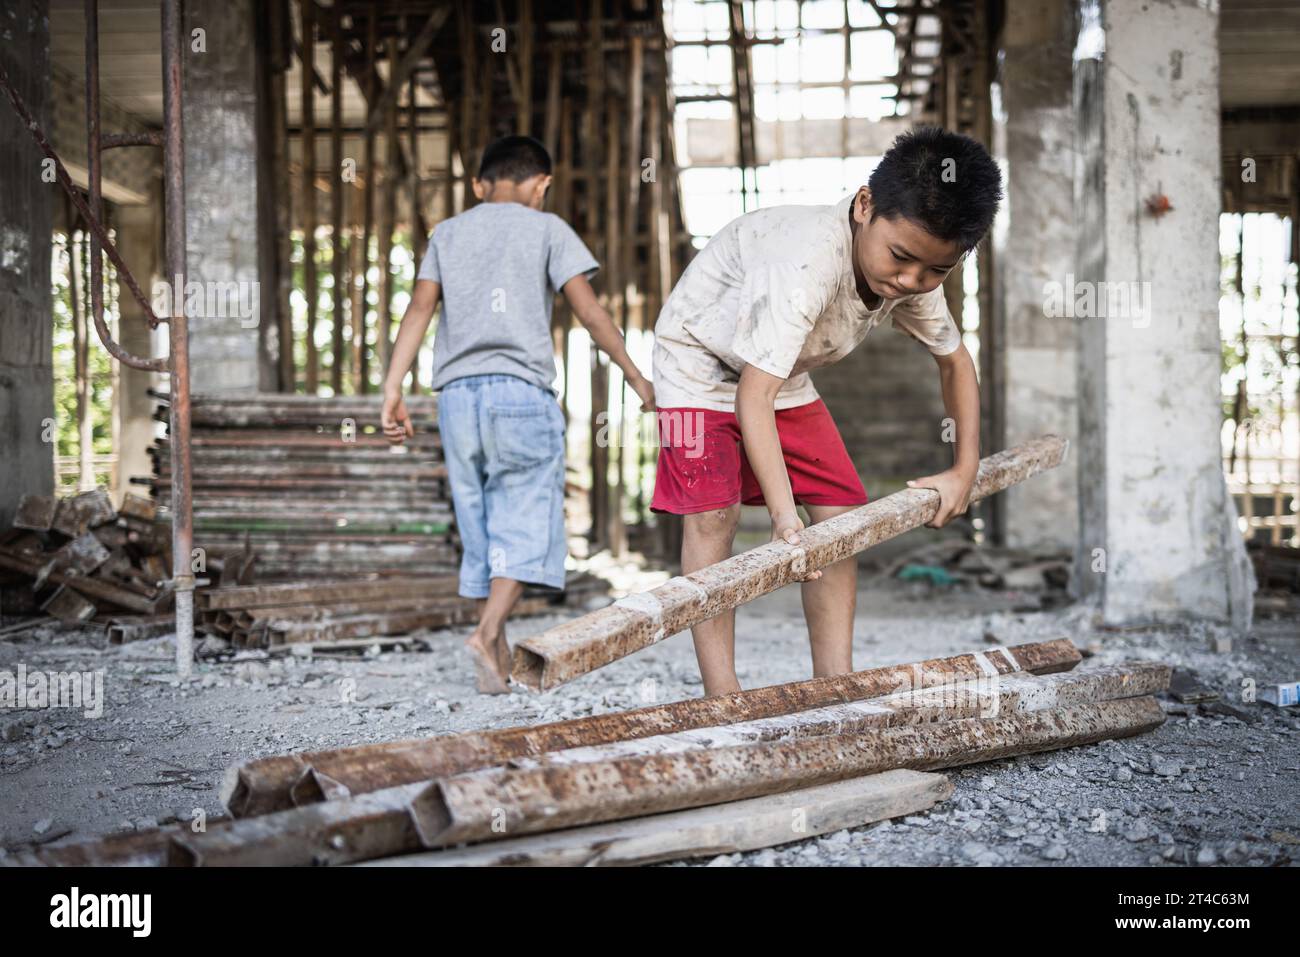 Poor children forced to do construction work, child labor, abuse To the rights of children, victims of human trafficking, World Day Against Child Labo Stock Photo